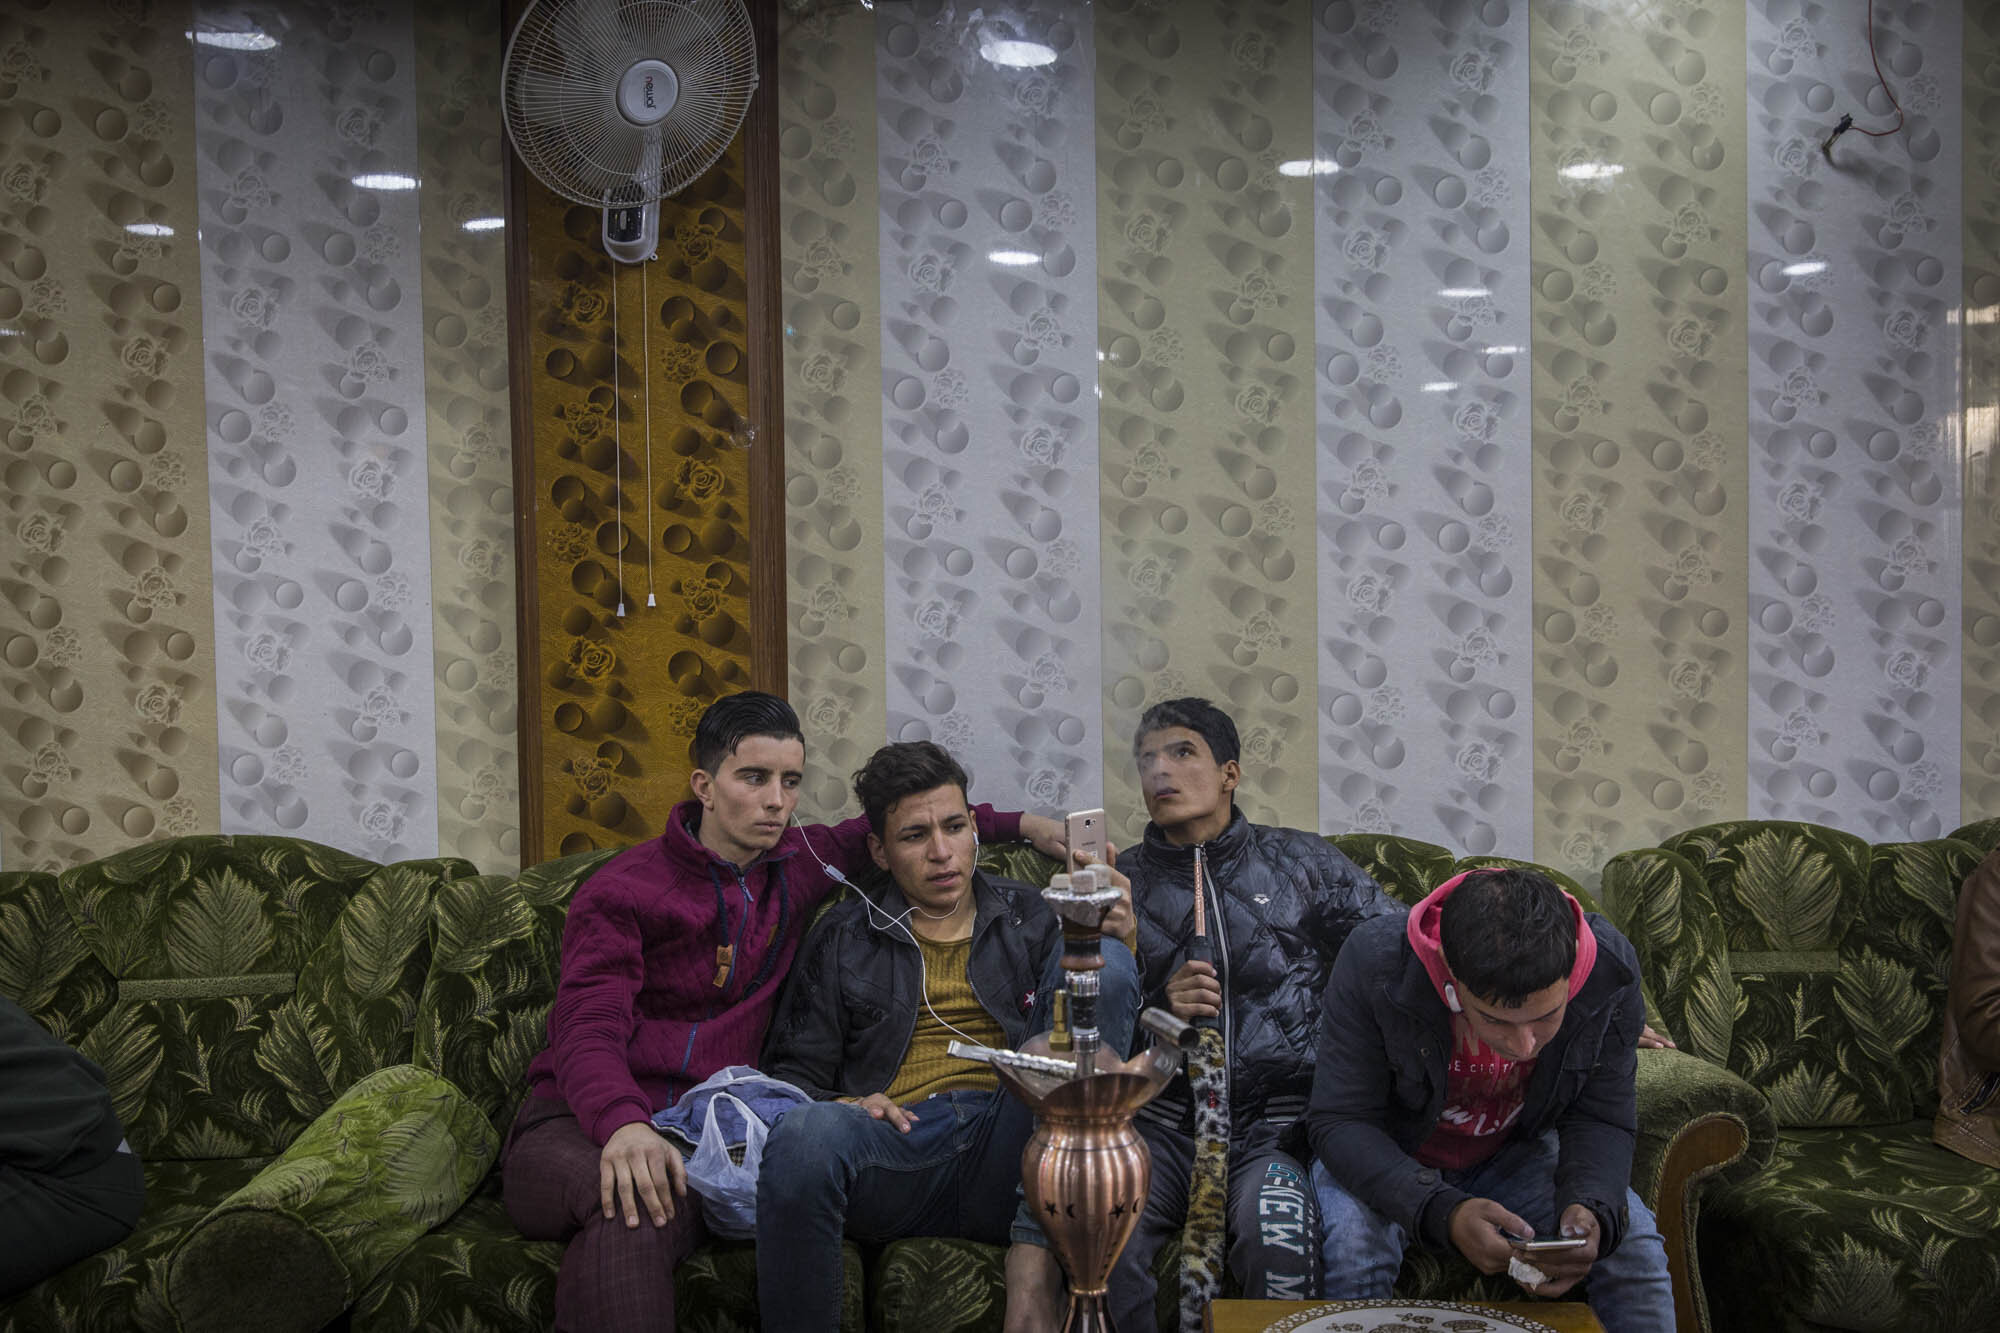  Less than 6 months after the end of the battle for Mosul, young men smoked hookah pipes and hung out at the recently opened Freedom Cafe in the west of the city. Iraq - December 2017 